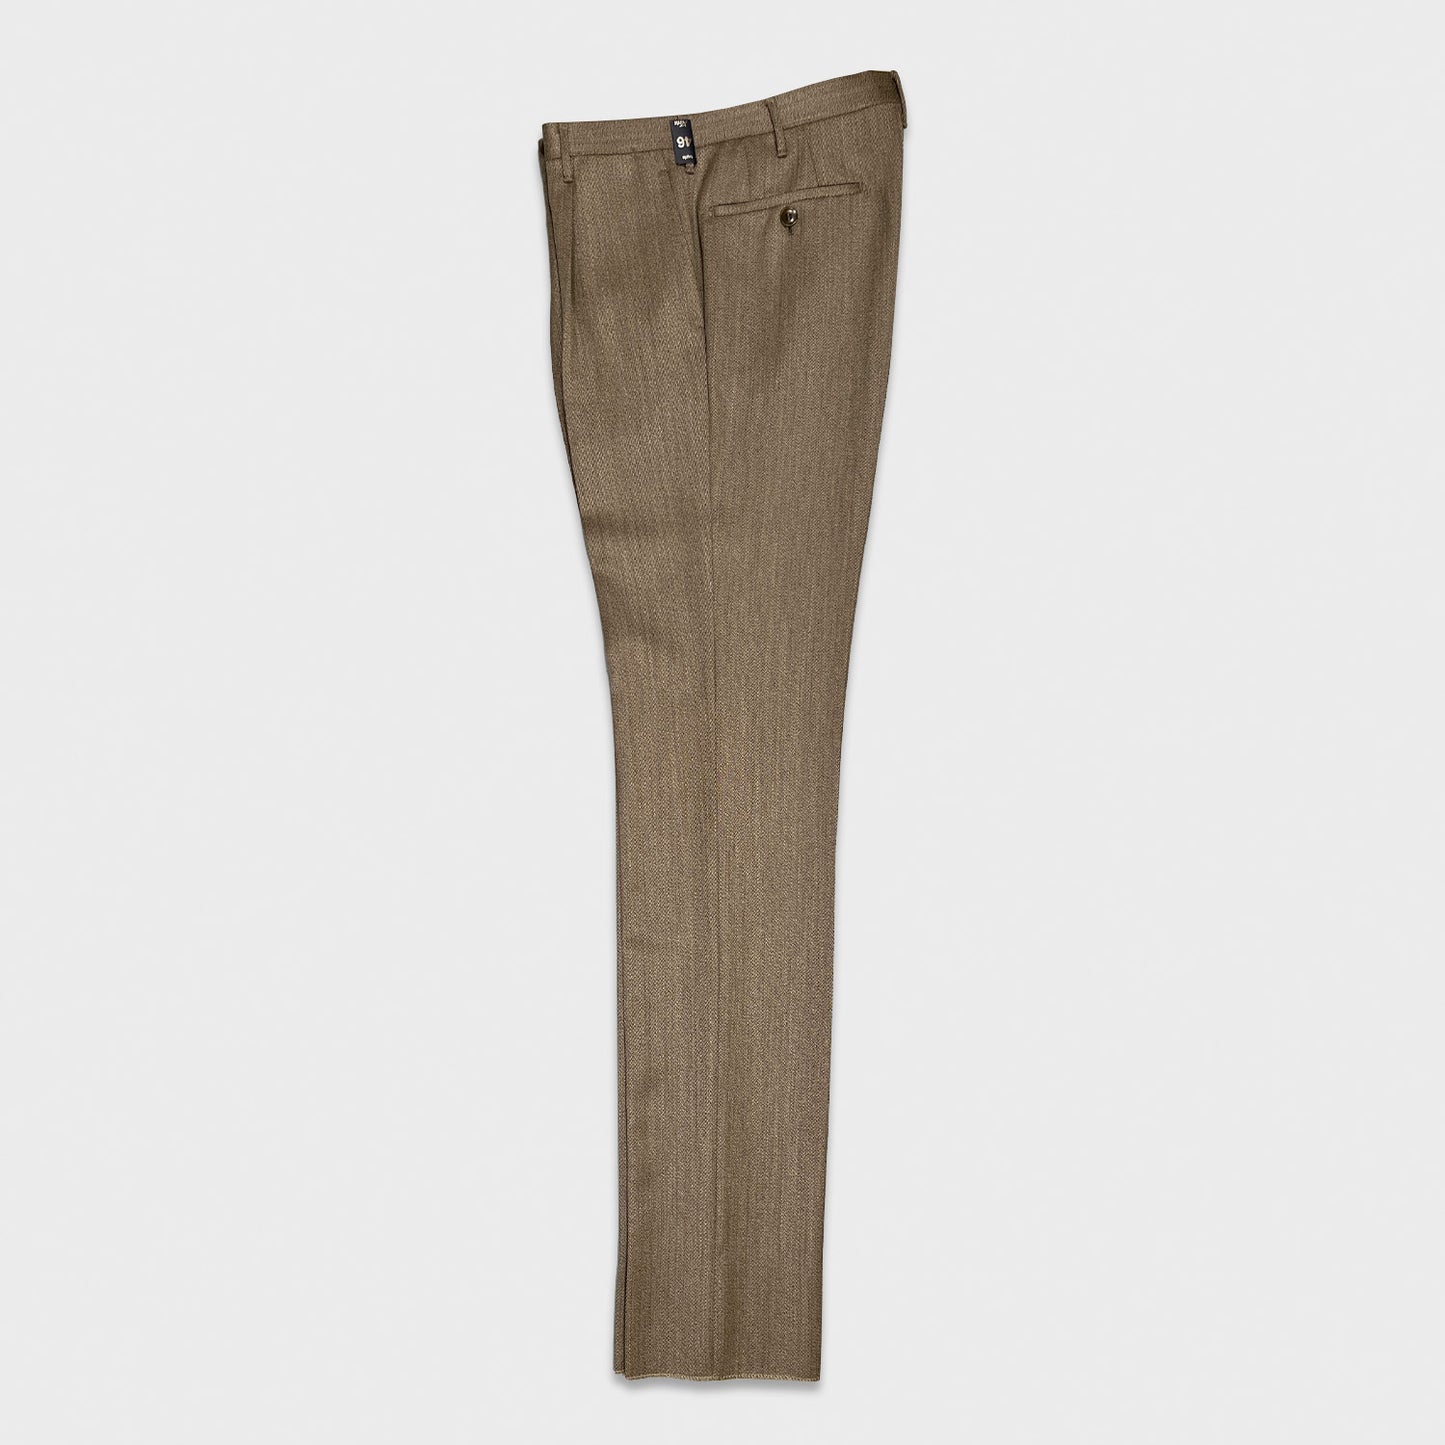 Rota Covert Wool Trousers Brown Beige-Wools Boutique Uomo